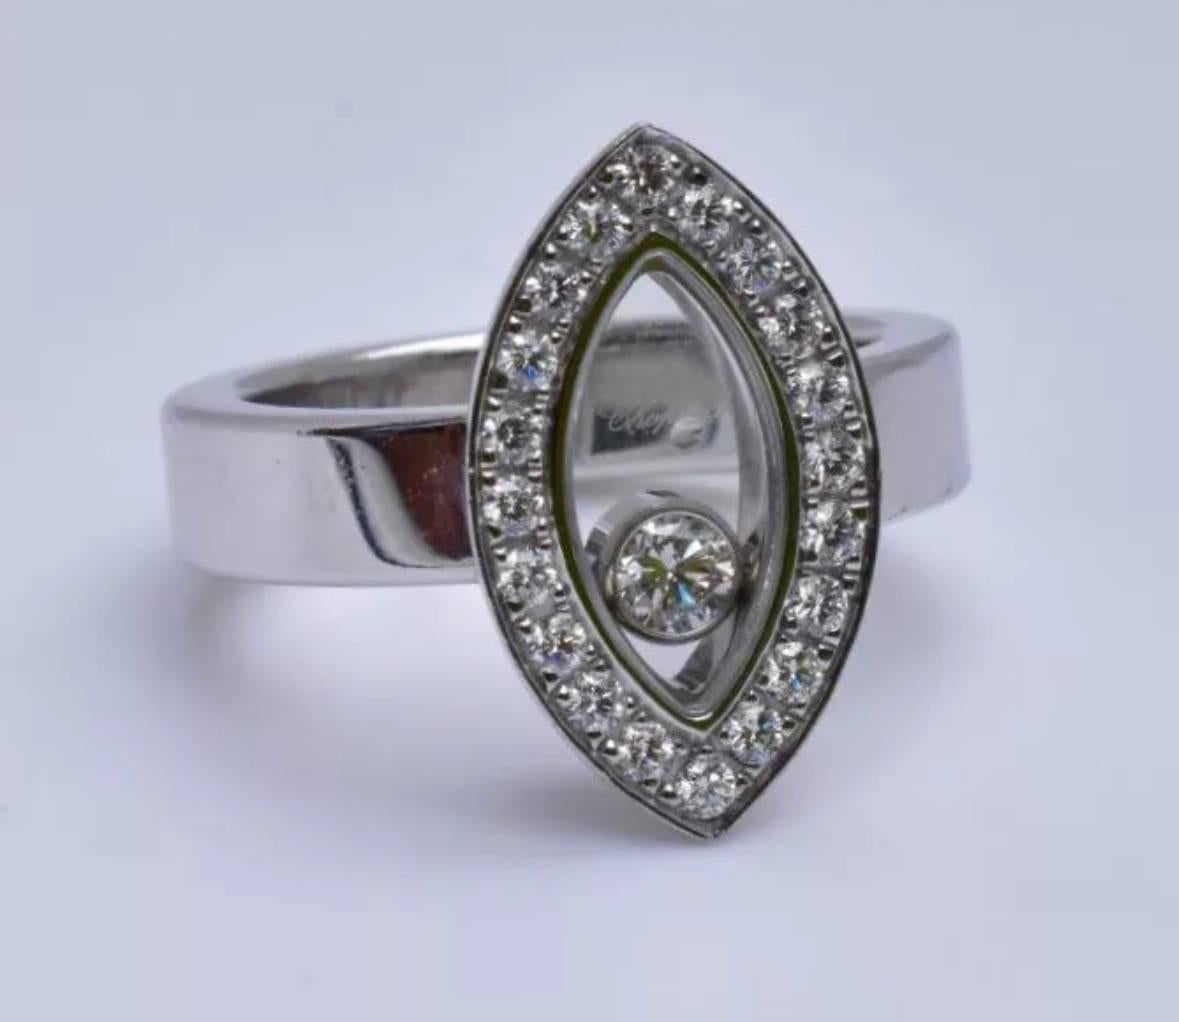 
A Chopard Happy Diamonds Ring set in 18k white gold. The ring featurins a floating round-cut diamond, weighing approximately 0.05 carats, in a marquise-shaped frame, set with 20 round brilliant-cut diamonds, weighing a total of approximately 0.30